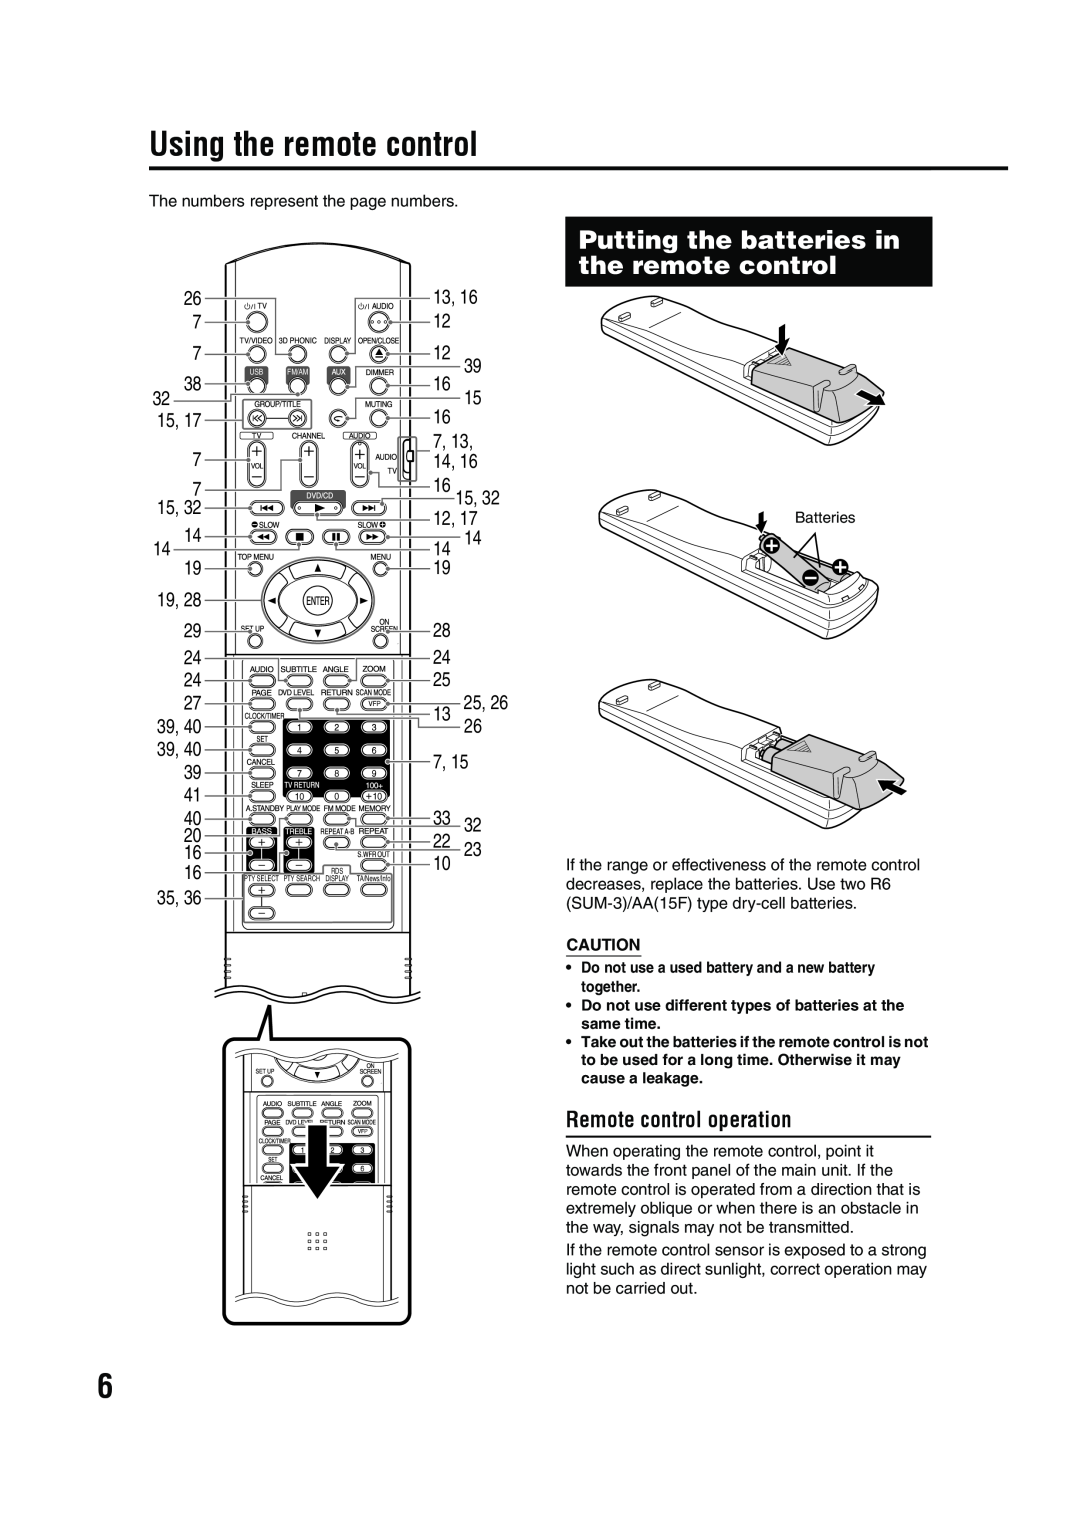 JVC GVT0143-008A manual Using the remote control, Putting the batteries in the remote control, Remote control operation 